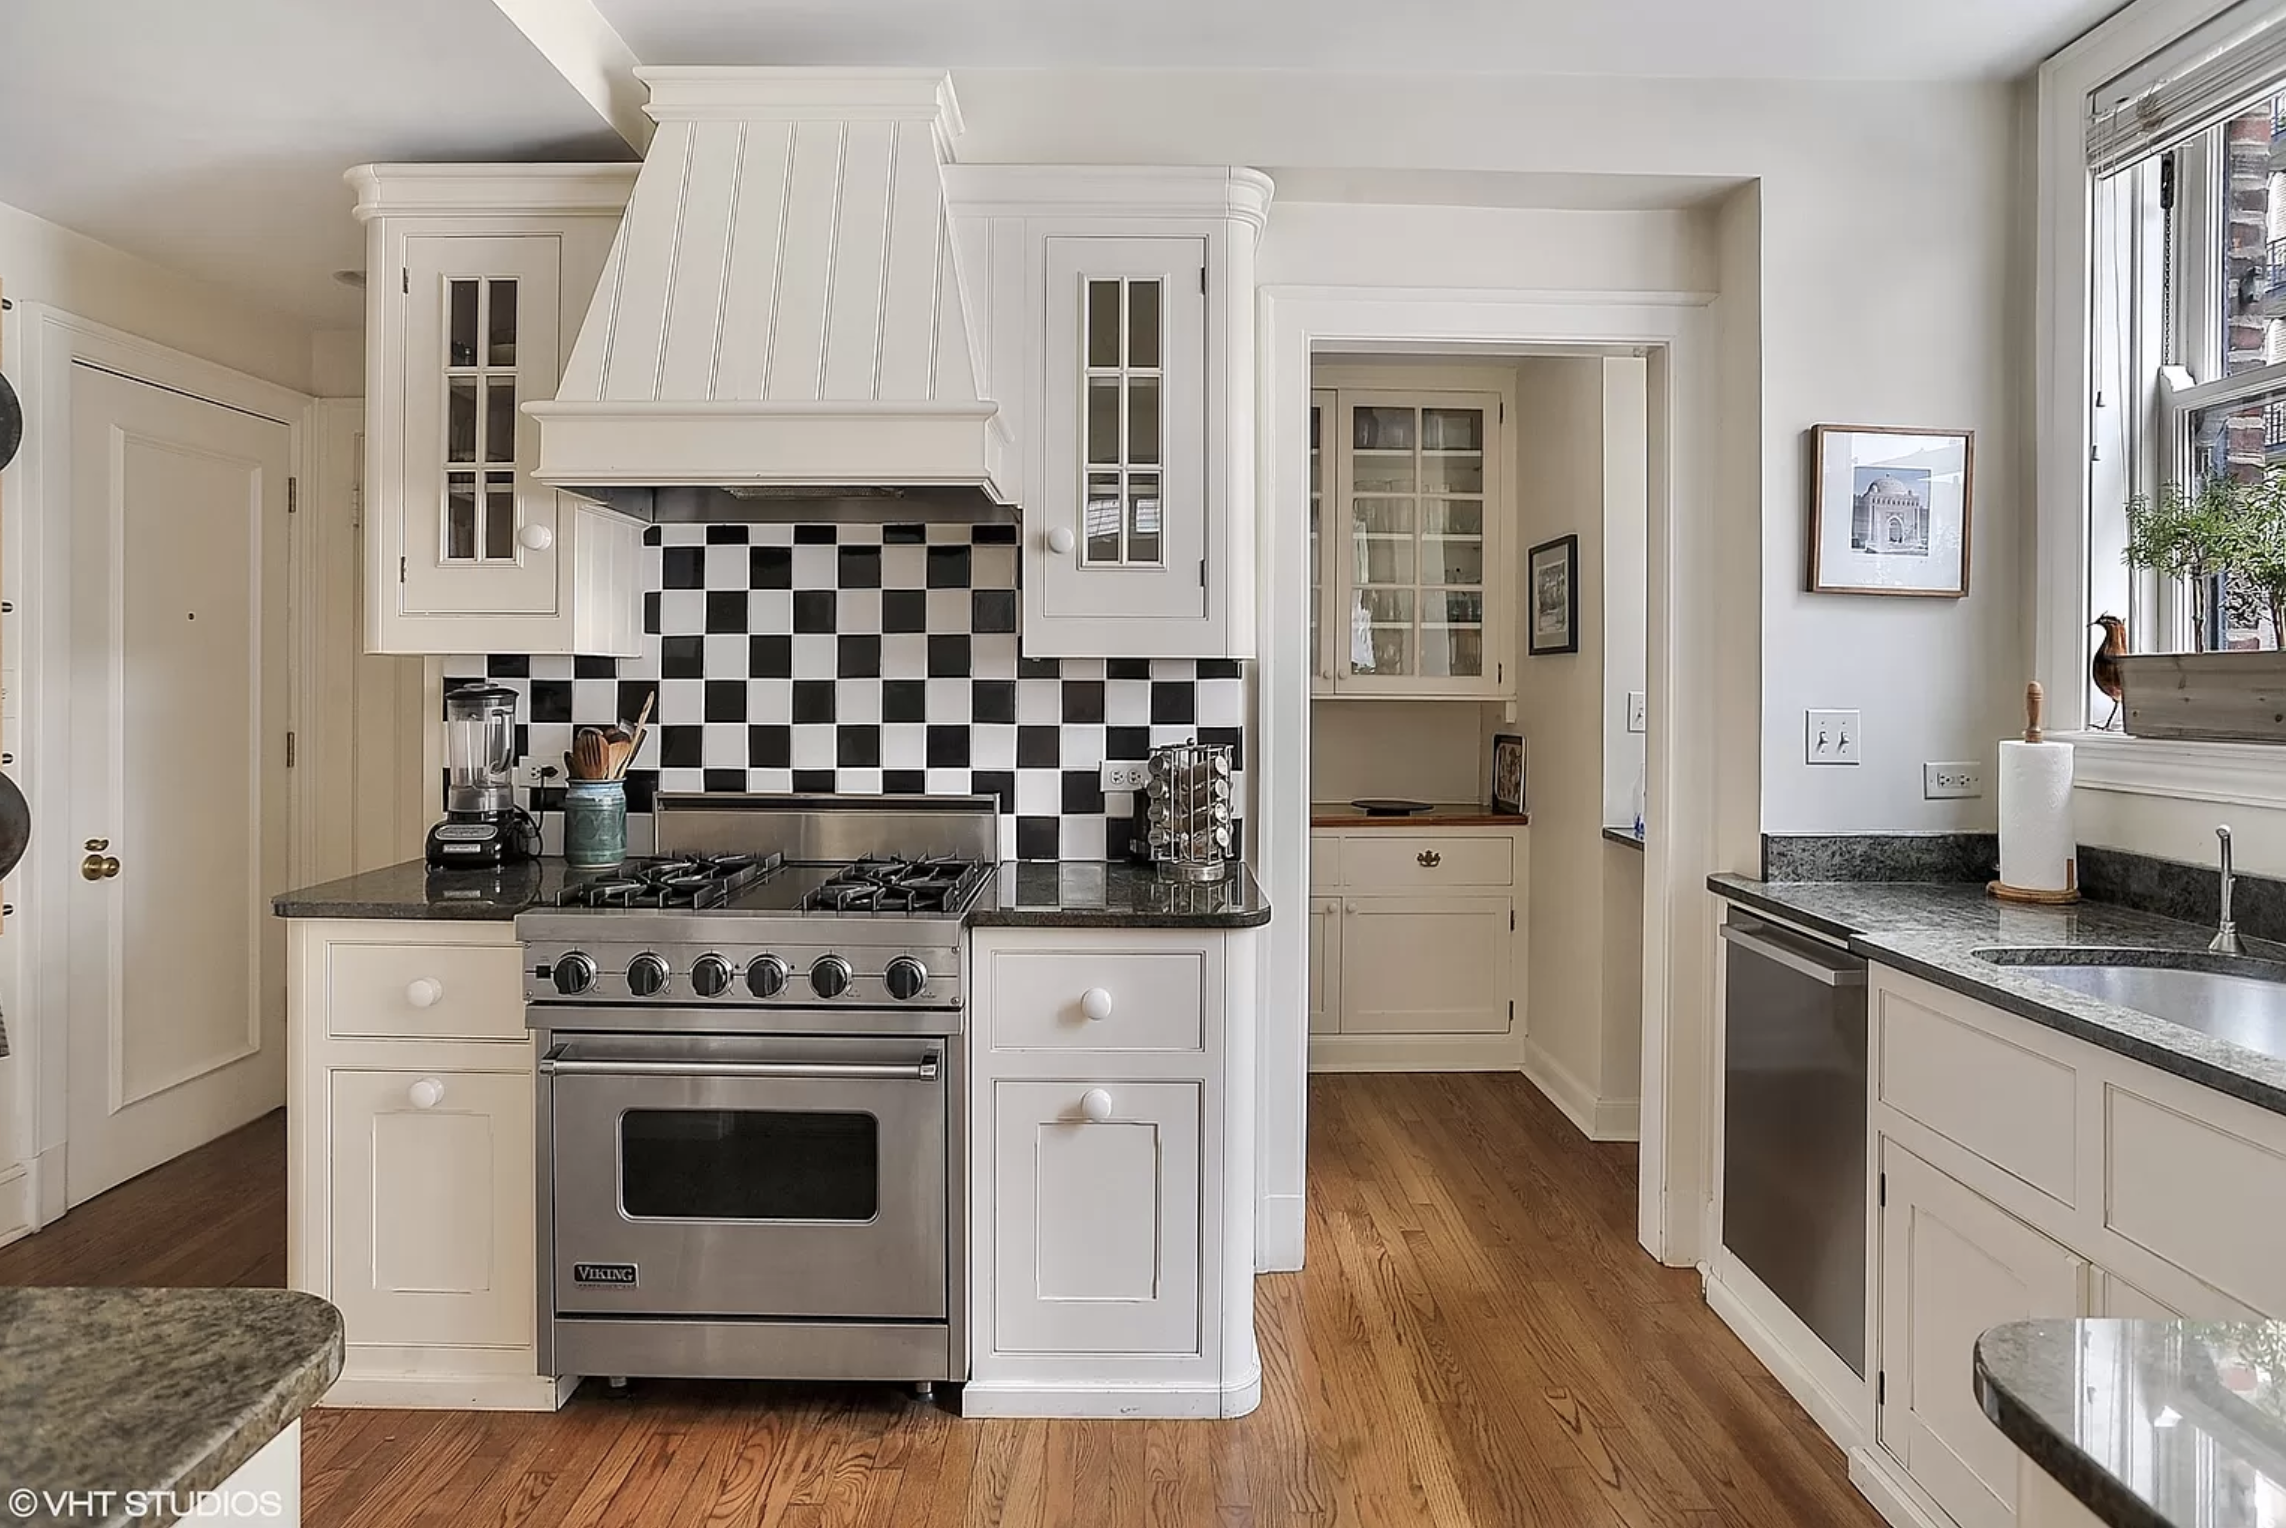 A kitchen with white cabinets, a checkered tile backsplash, a butler’s pantry, and a window over the sink.